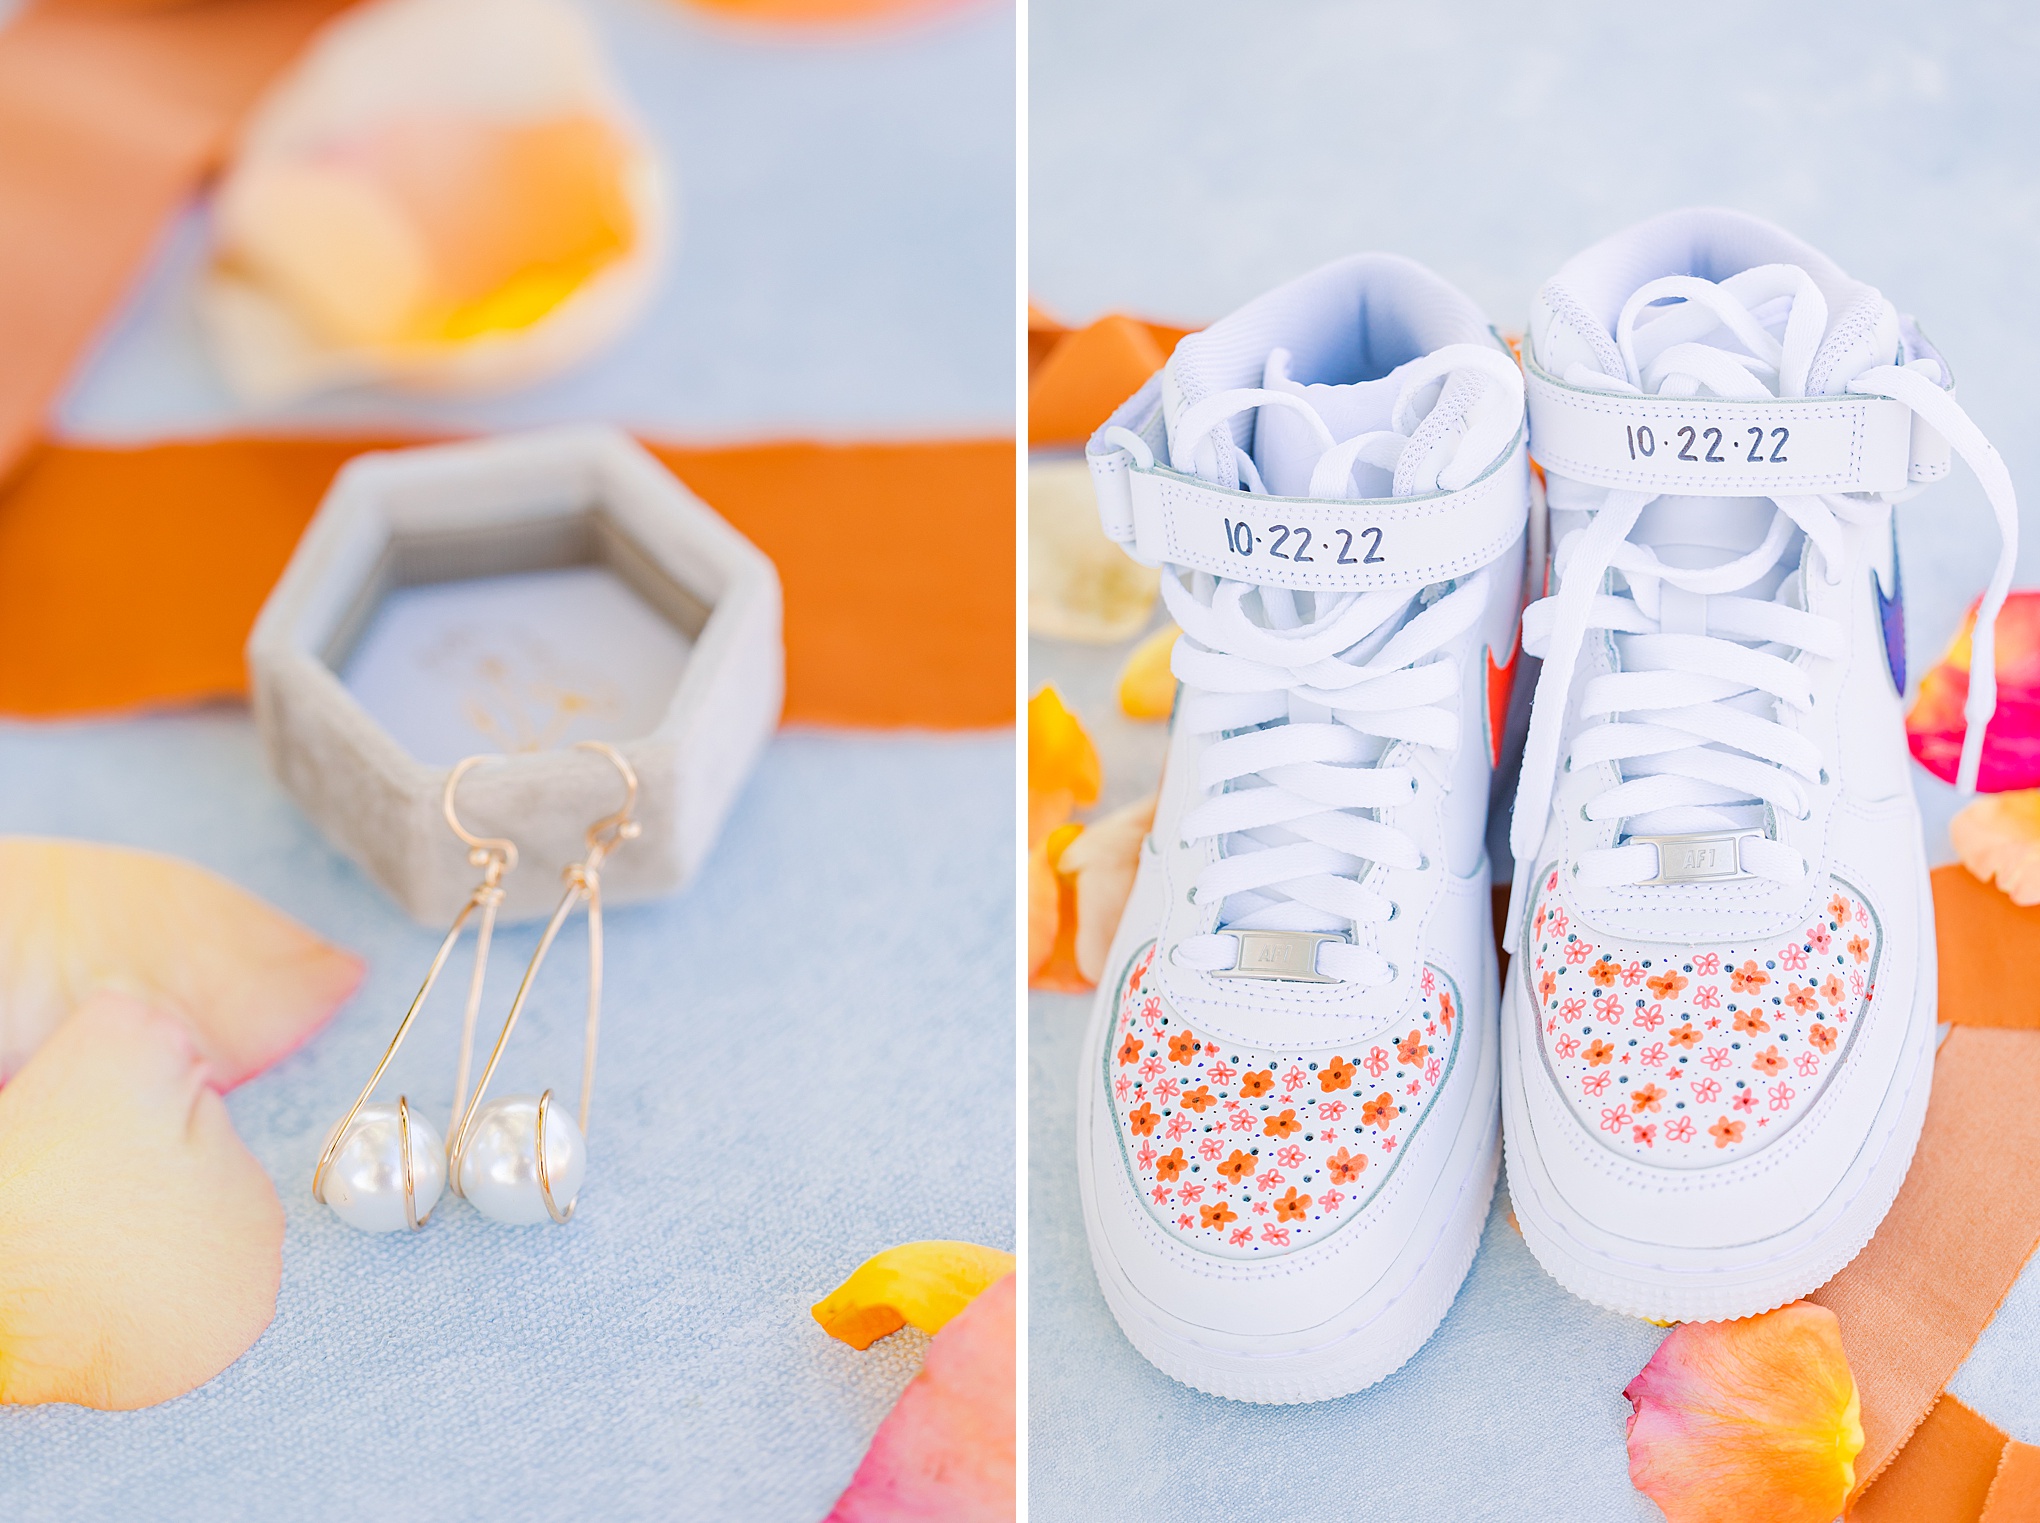 nikes for wedding shoes